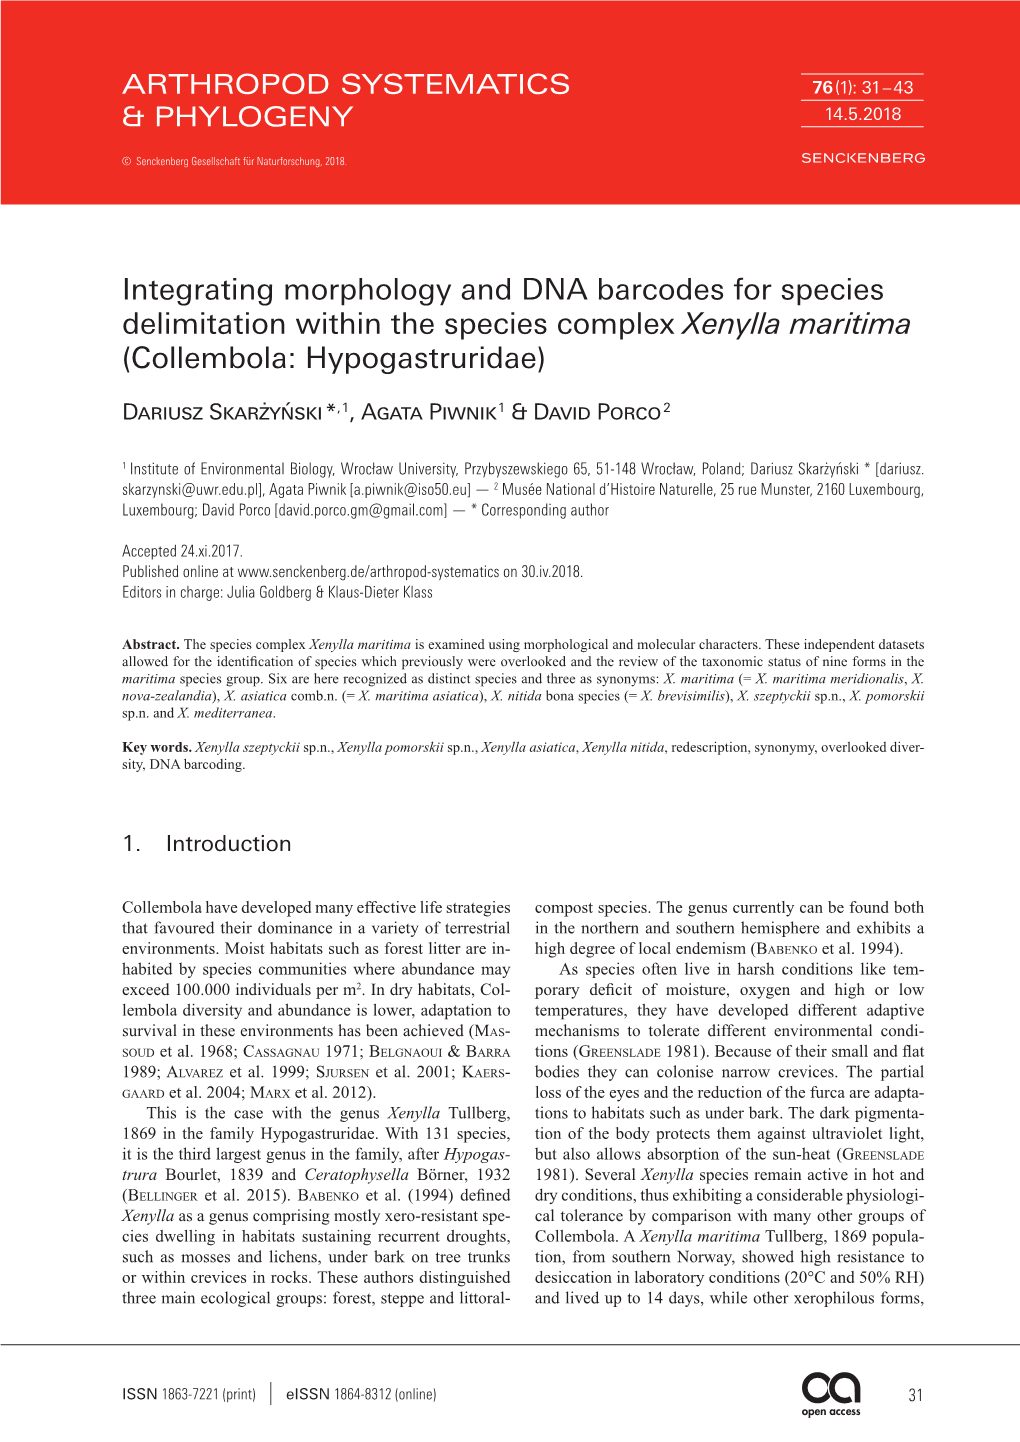 Integrating Morphology and DNA Barcodes for Species Delimitation Within the Species Complex Xenylla Maritima (Collembola: Hypogastruridae)